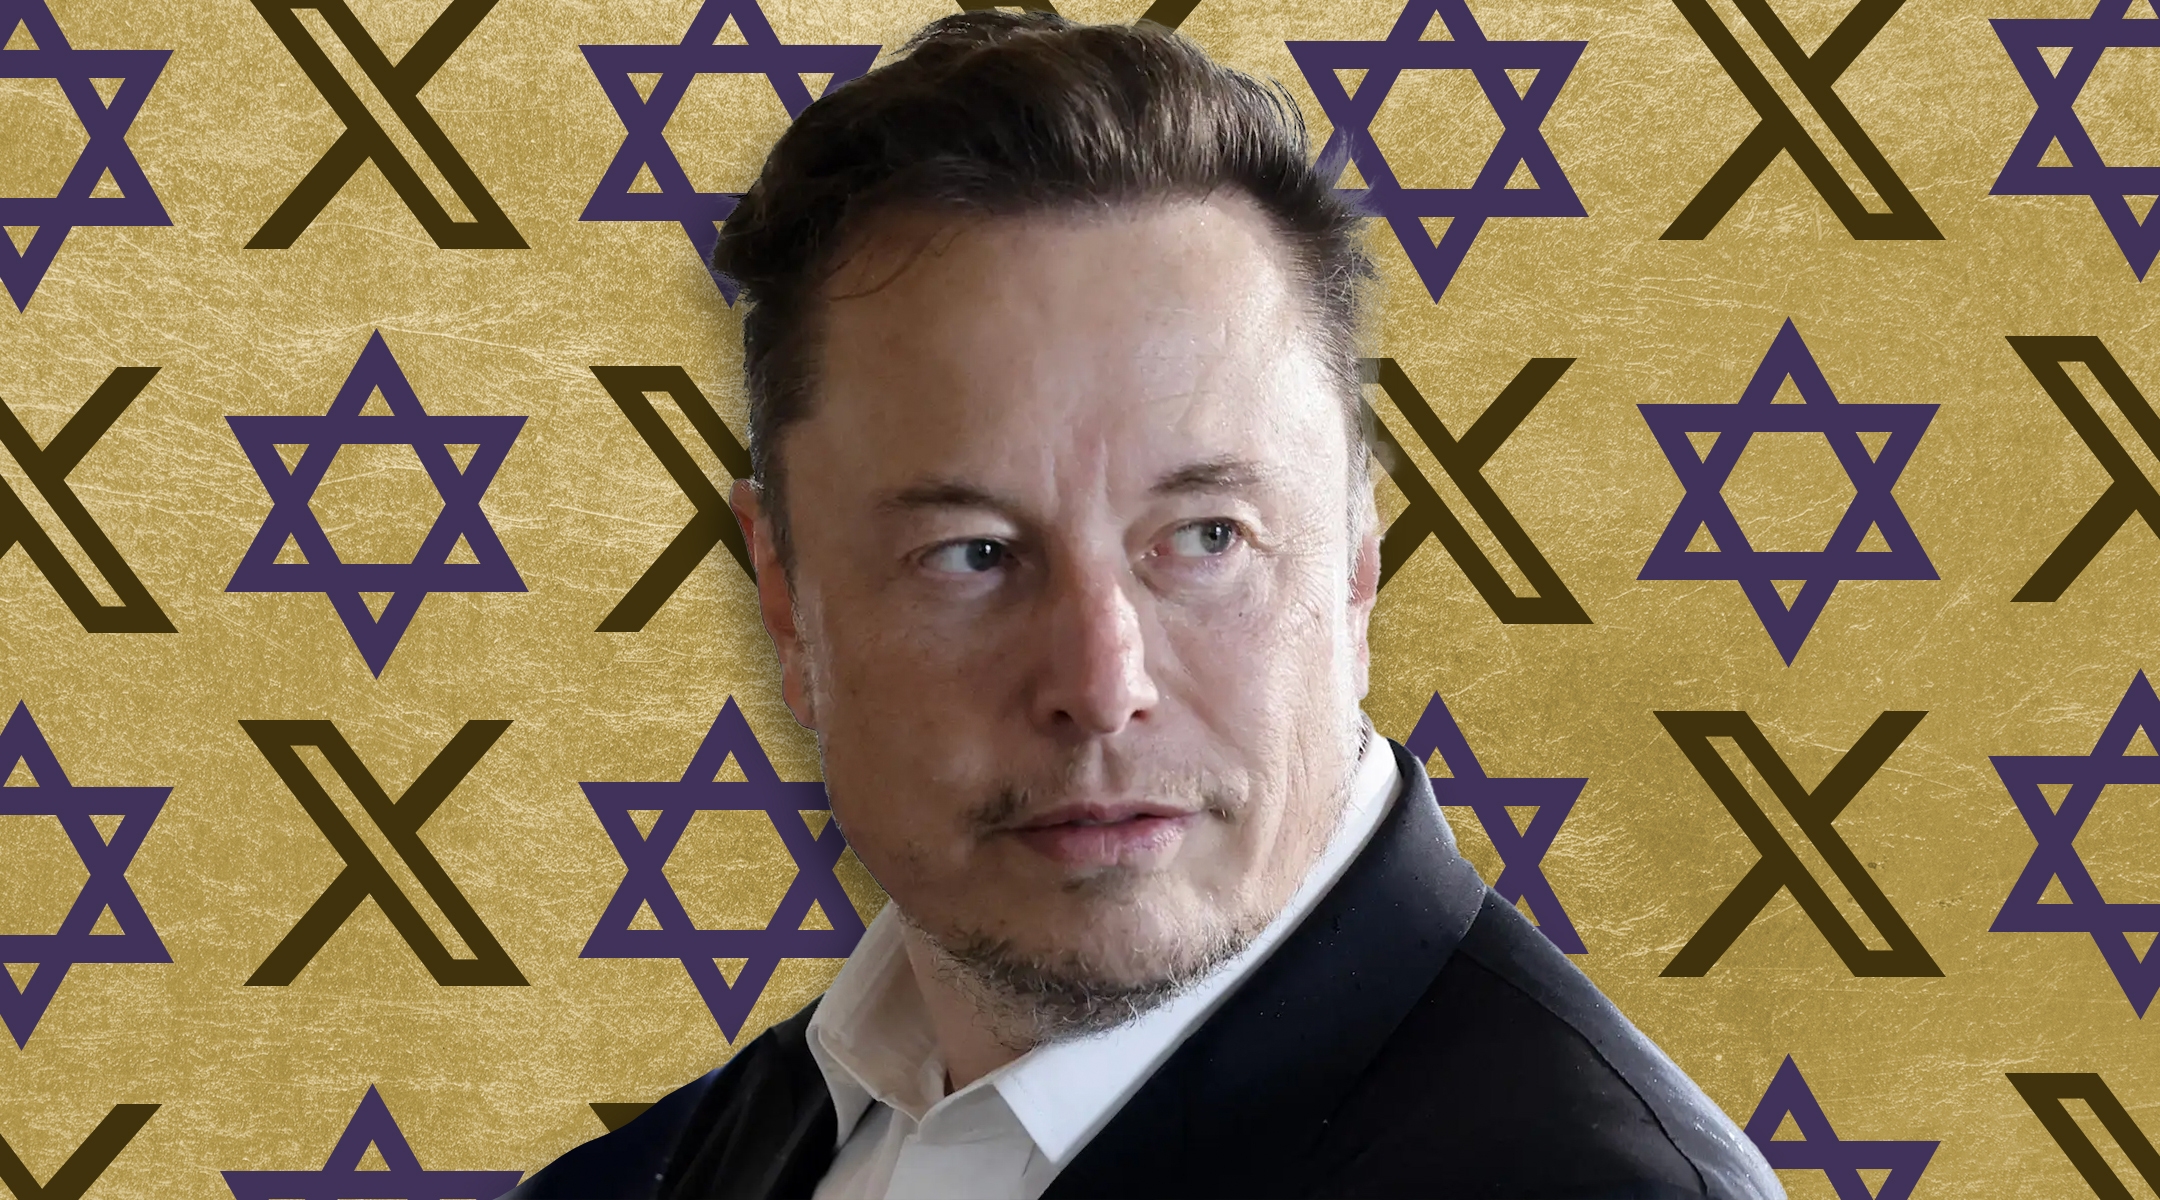 Under Elon Musk, the social media platform X has been at the center of several antisemitism-related controversies. (Ludovic Marin/Pool/AFP via Getty Images/Design by Mollie Suss)